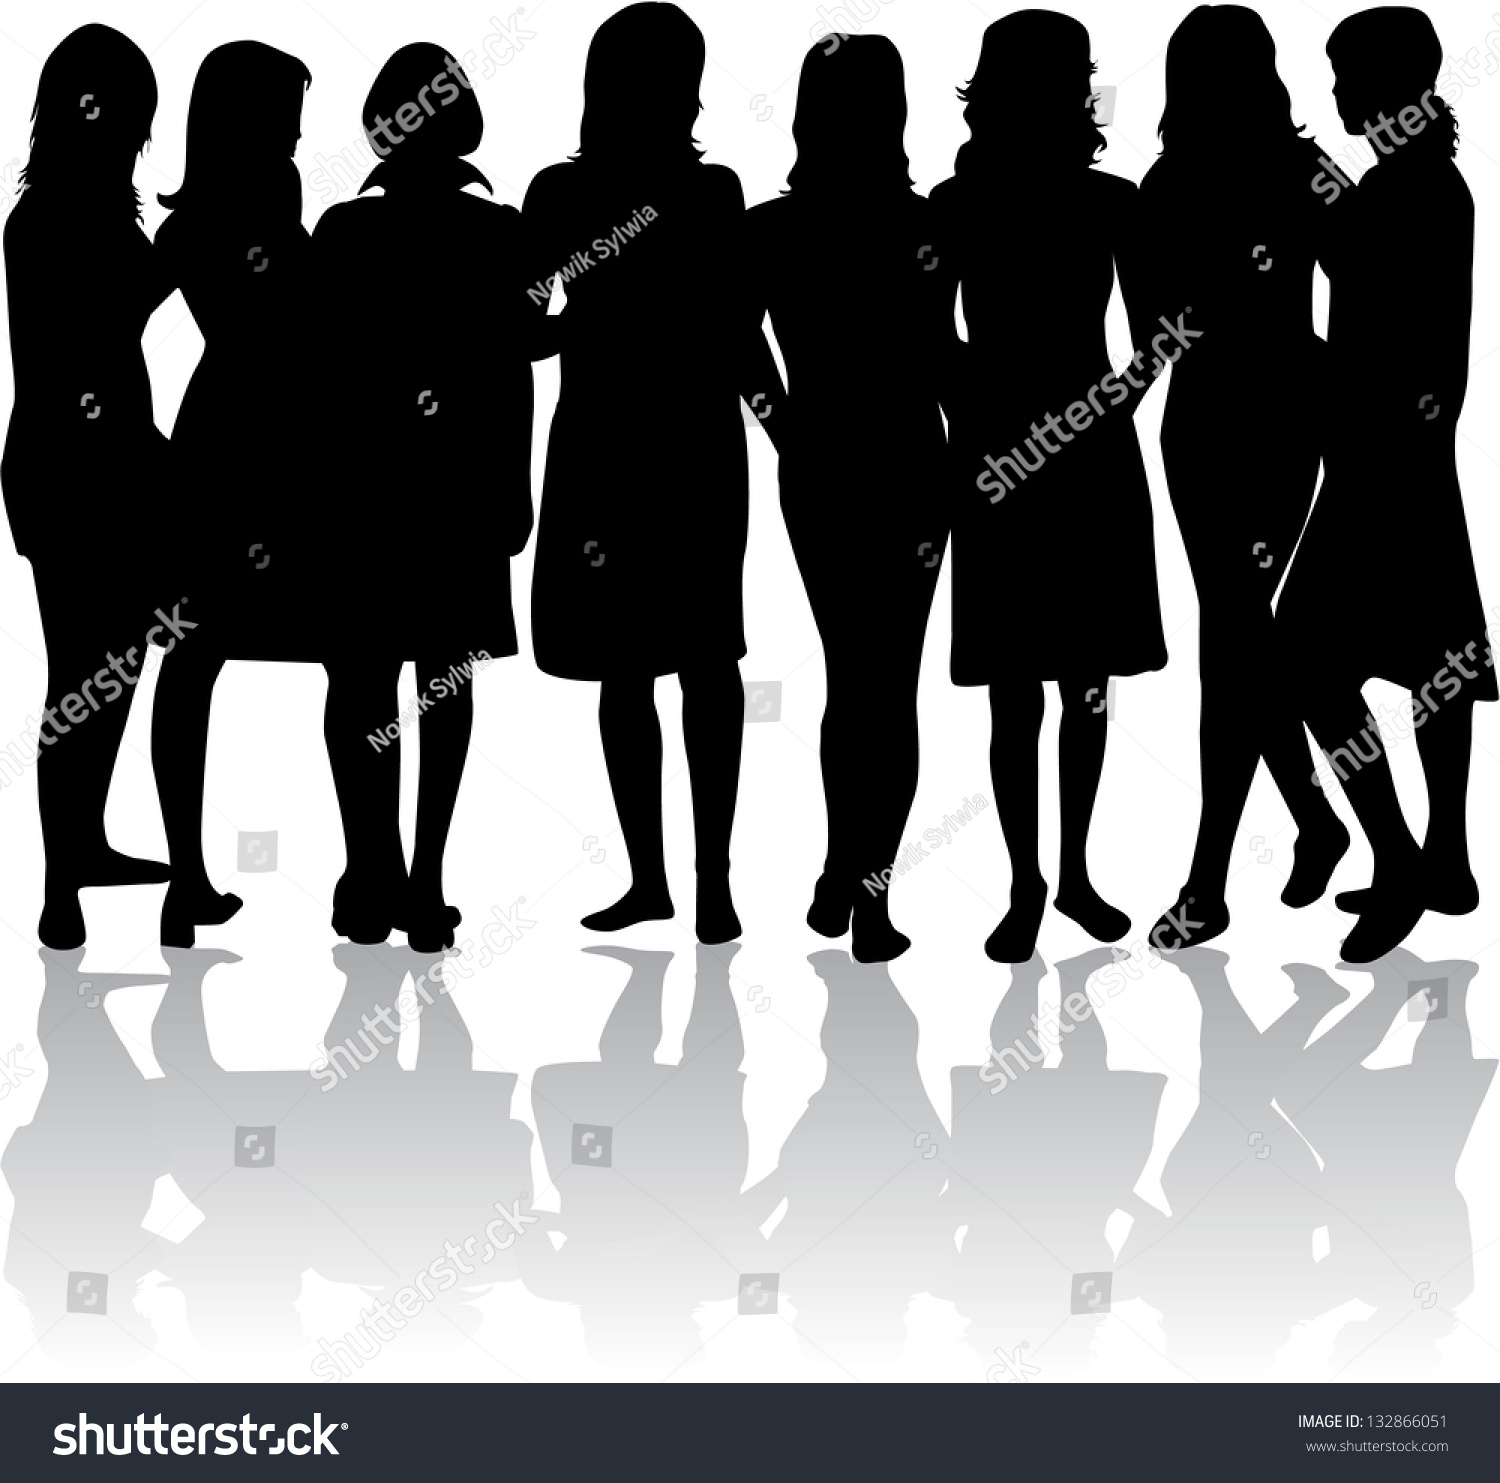 Group Womens Black Silhouettes Stock Vector 132866051 - Shutterstock